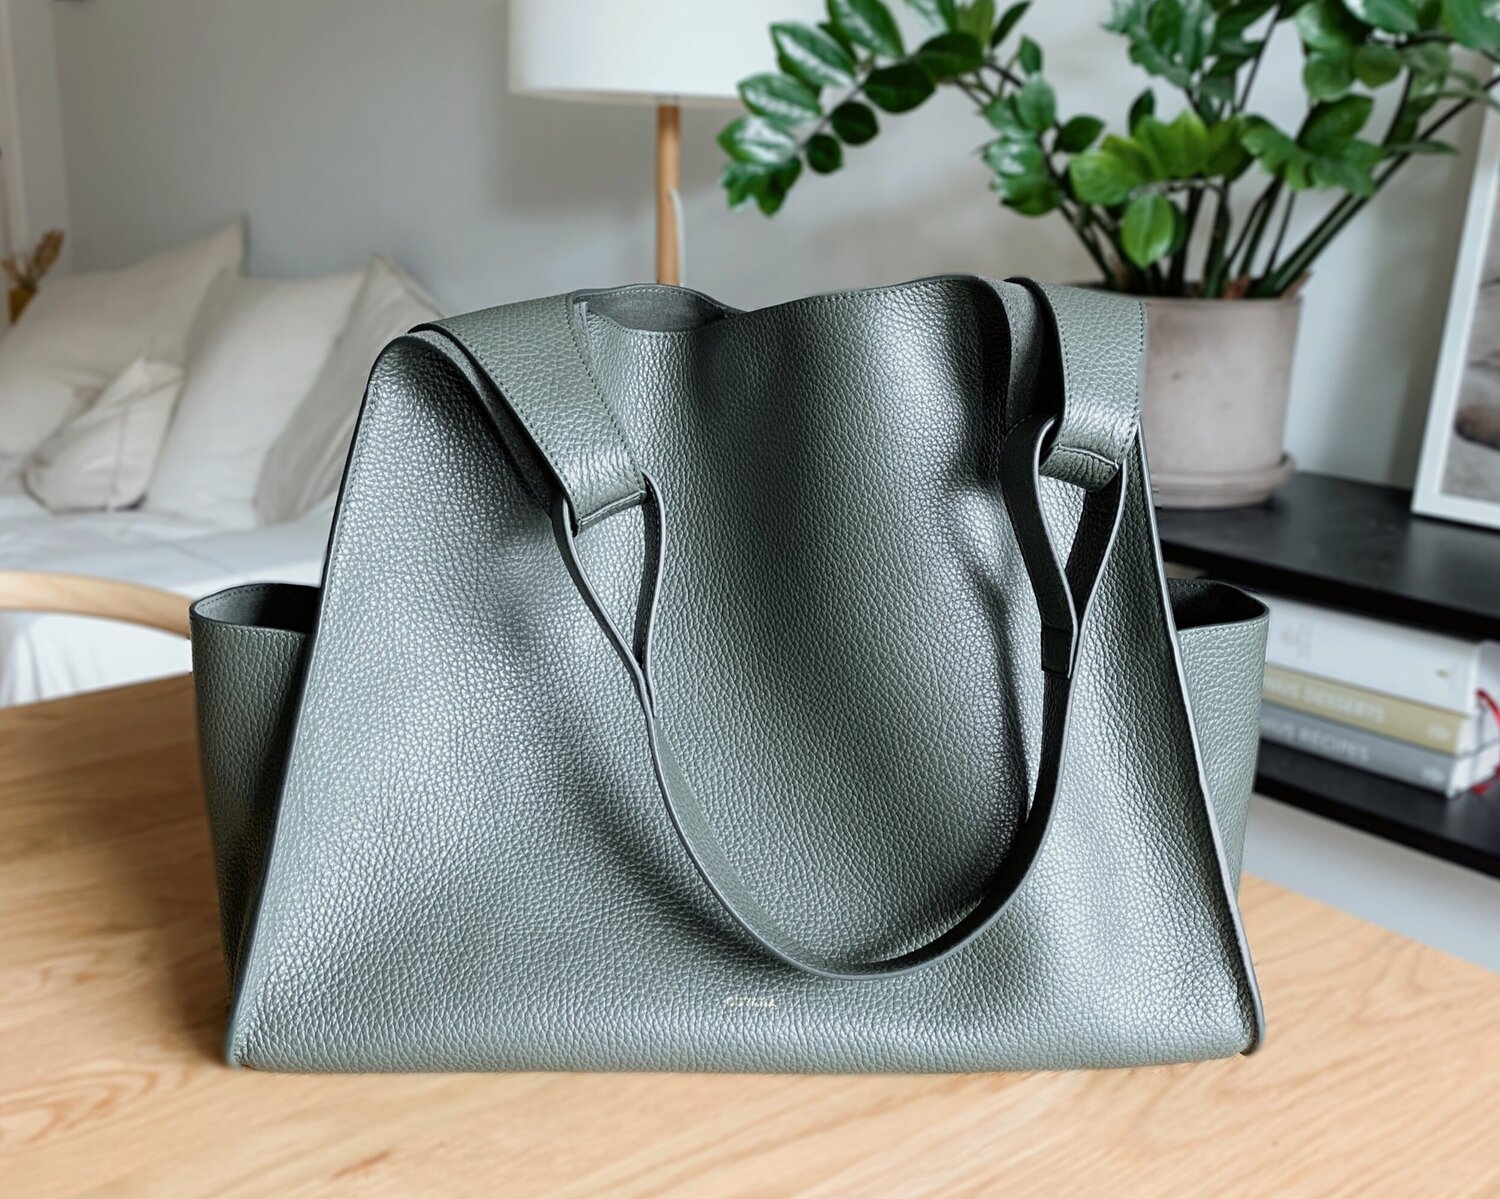 Cuyana Oversized Double Loop Bag Review 